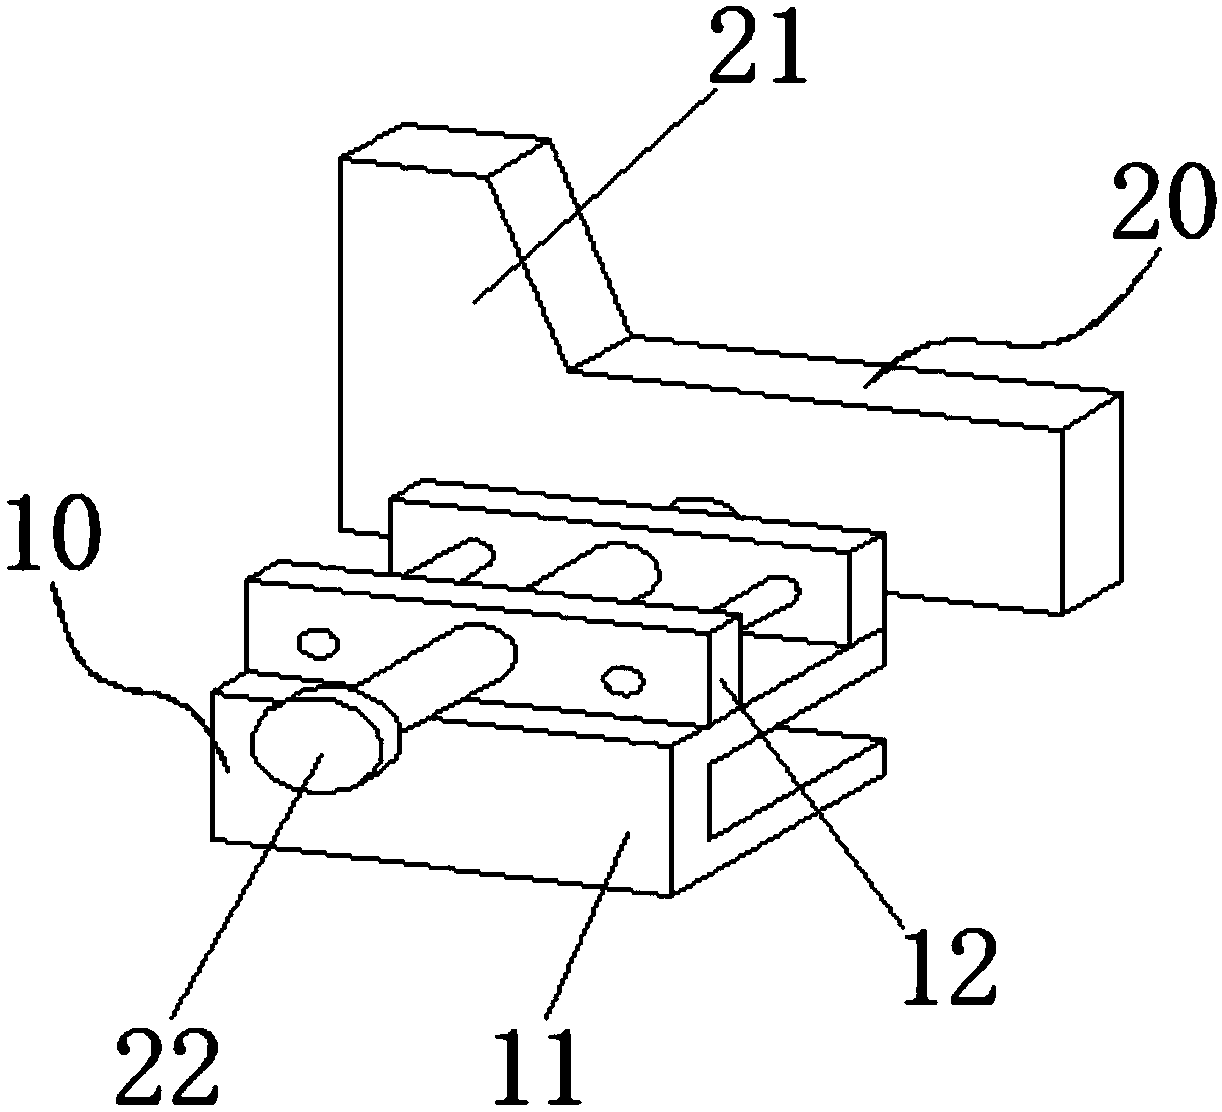 Drunkenness lateral lying position fixing device